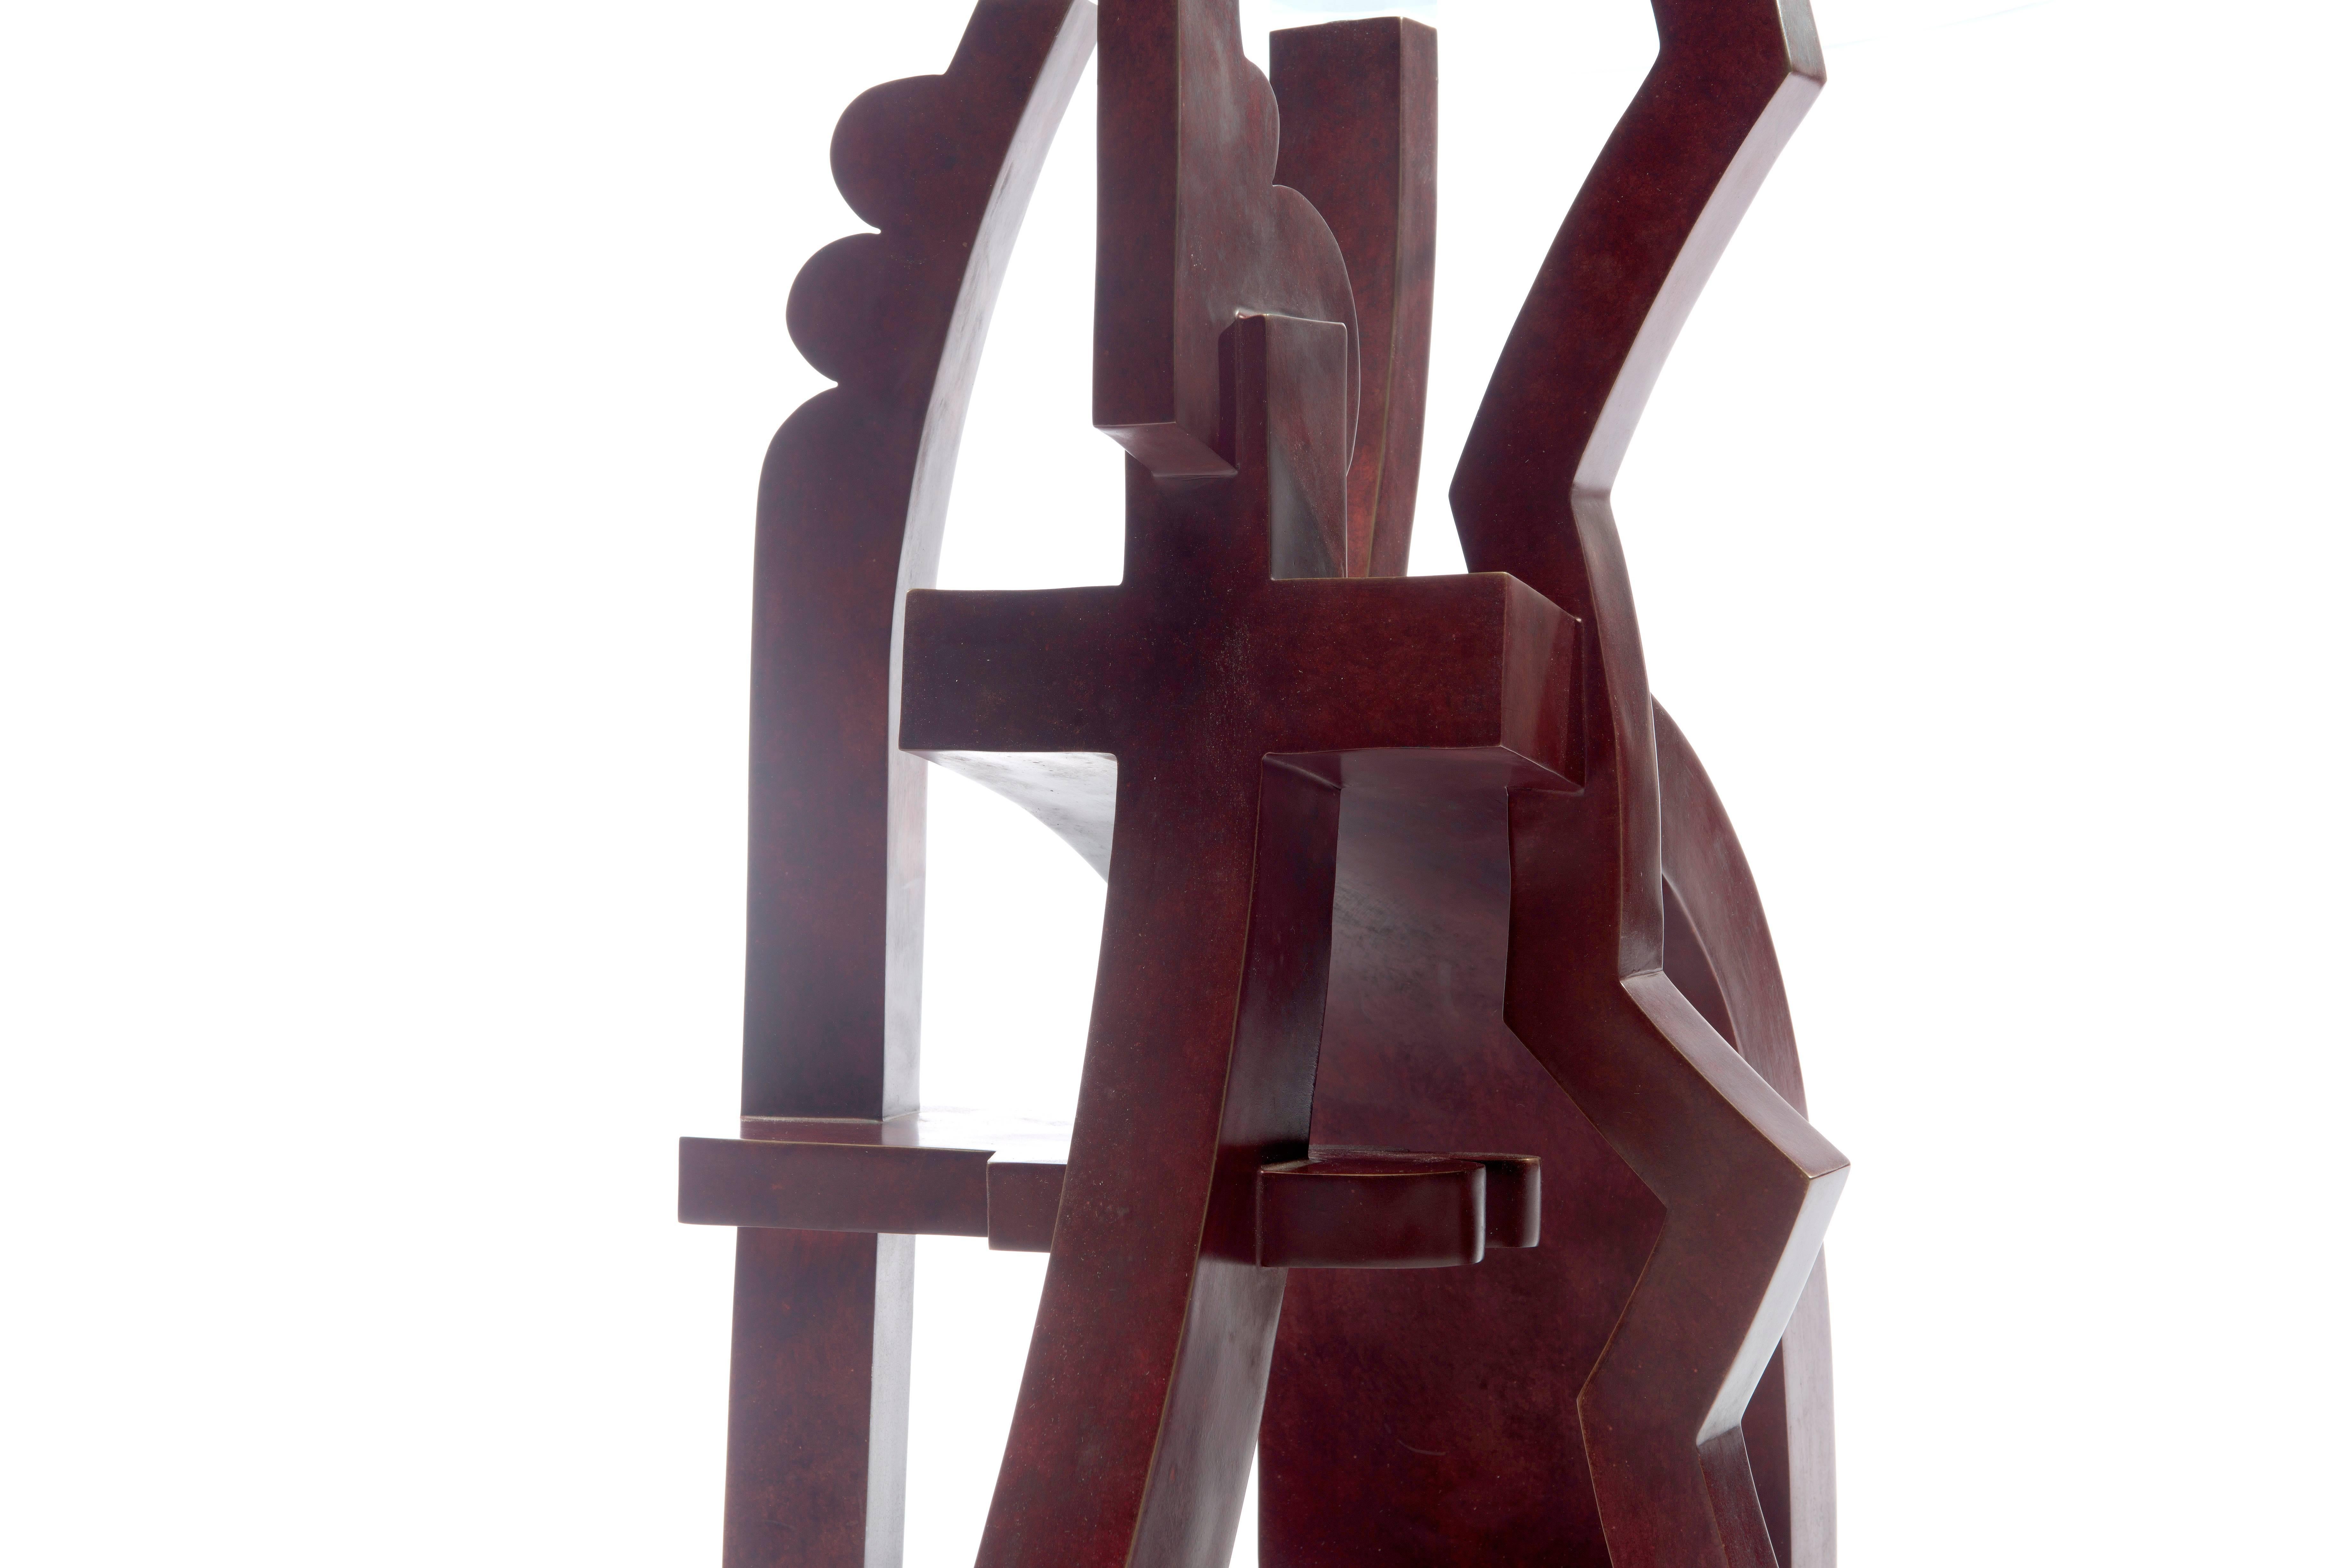 Garry Knox Bennett
Small Side- Table #1, 2011
Patinated cast bronze, glass
18 x 18 x 25 in

A major retrospective of Garry’s work was initiated at the Museum of Art and Design, NY (formerly the America Craft Museum) in January 2001, which included a